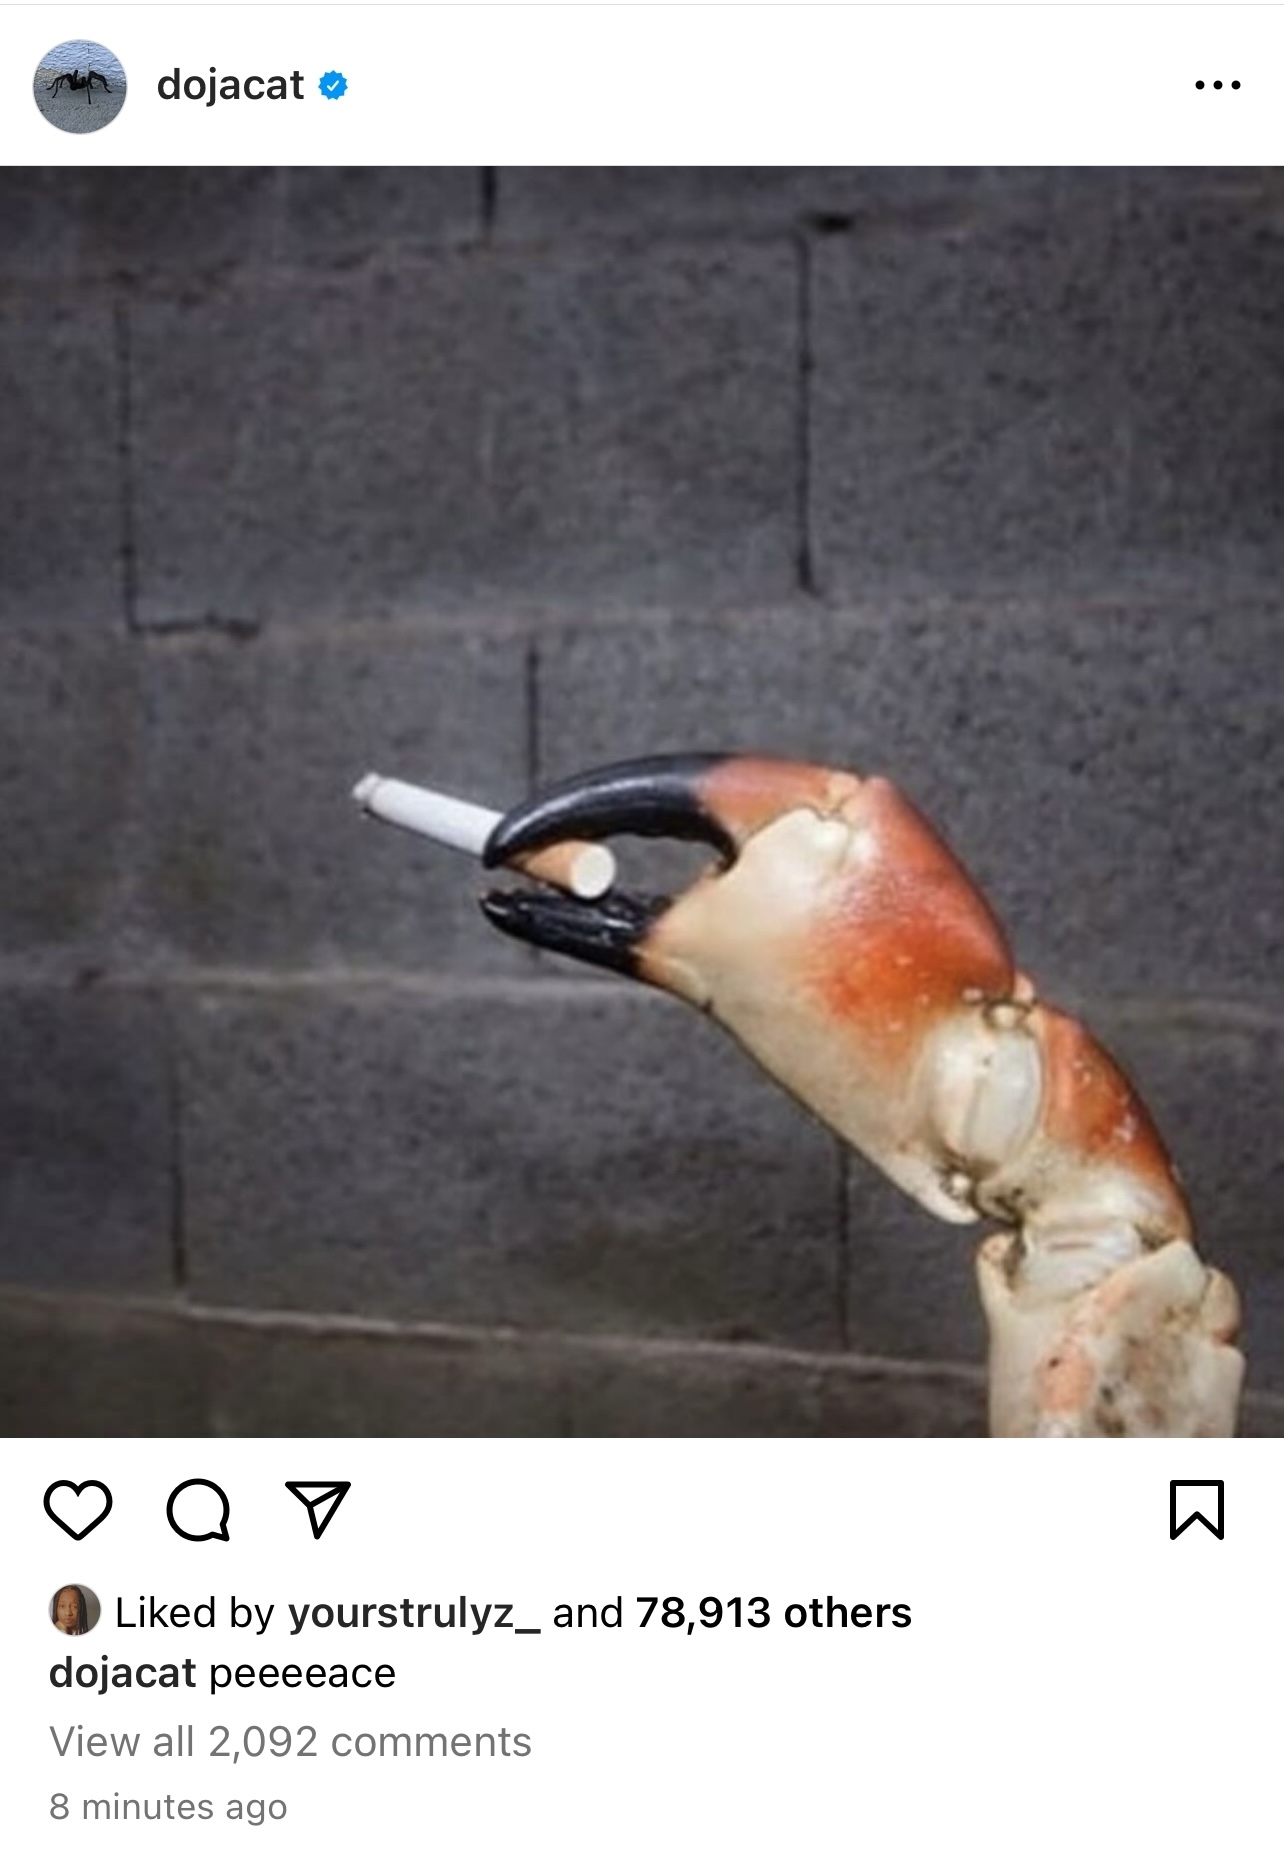 A crab claw holds a cigarette against a wall; posted on dojacat&#x27;s social media